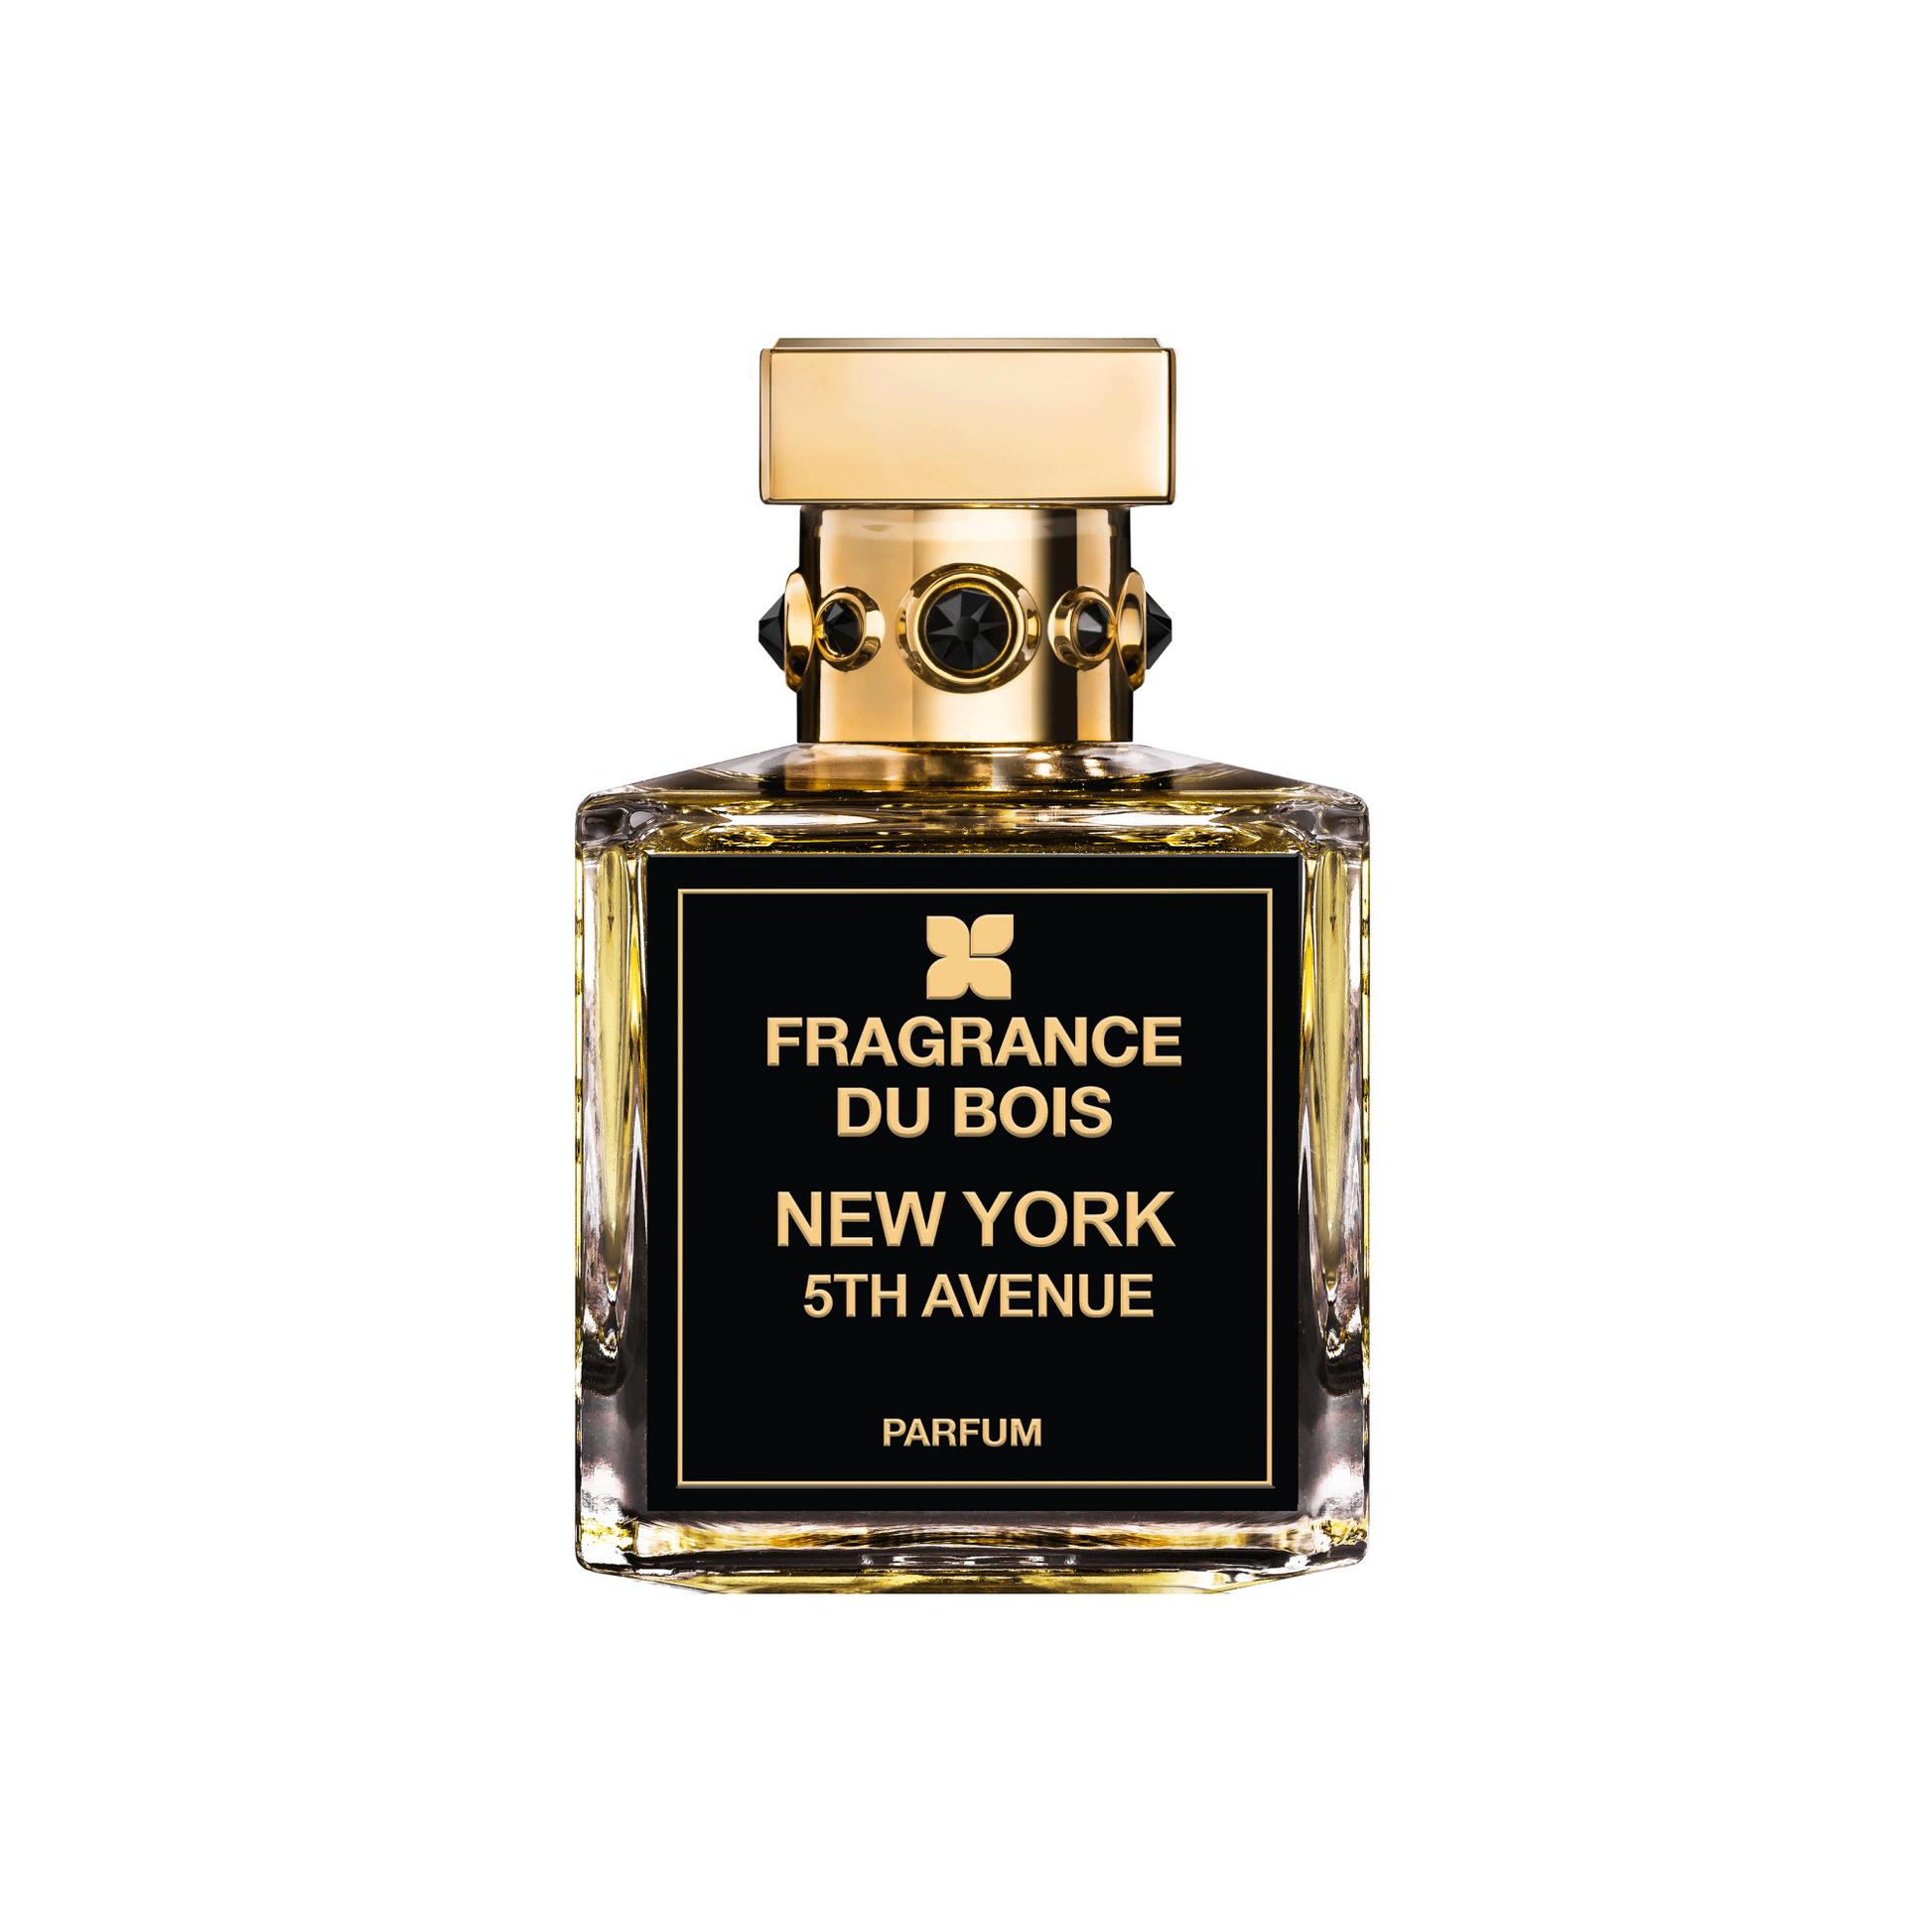 Top 5 Most Expensive Perfumes In The World - Eau Yes NY